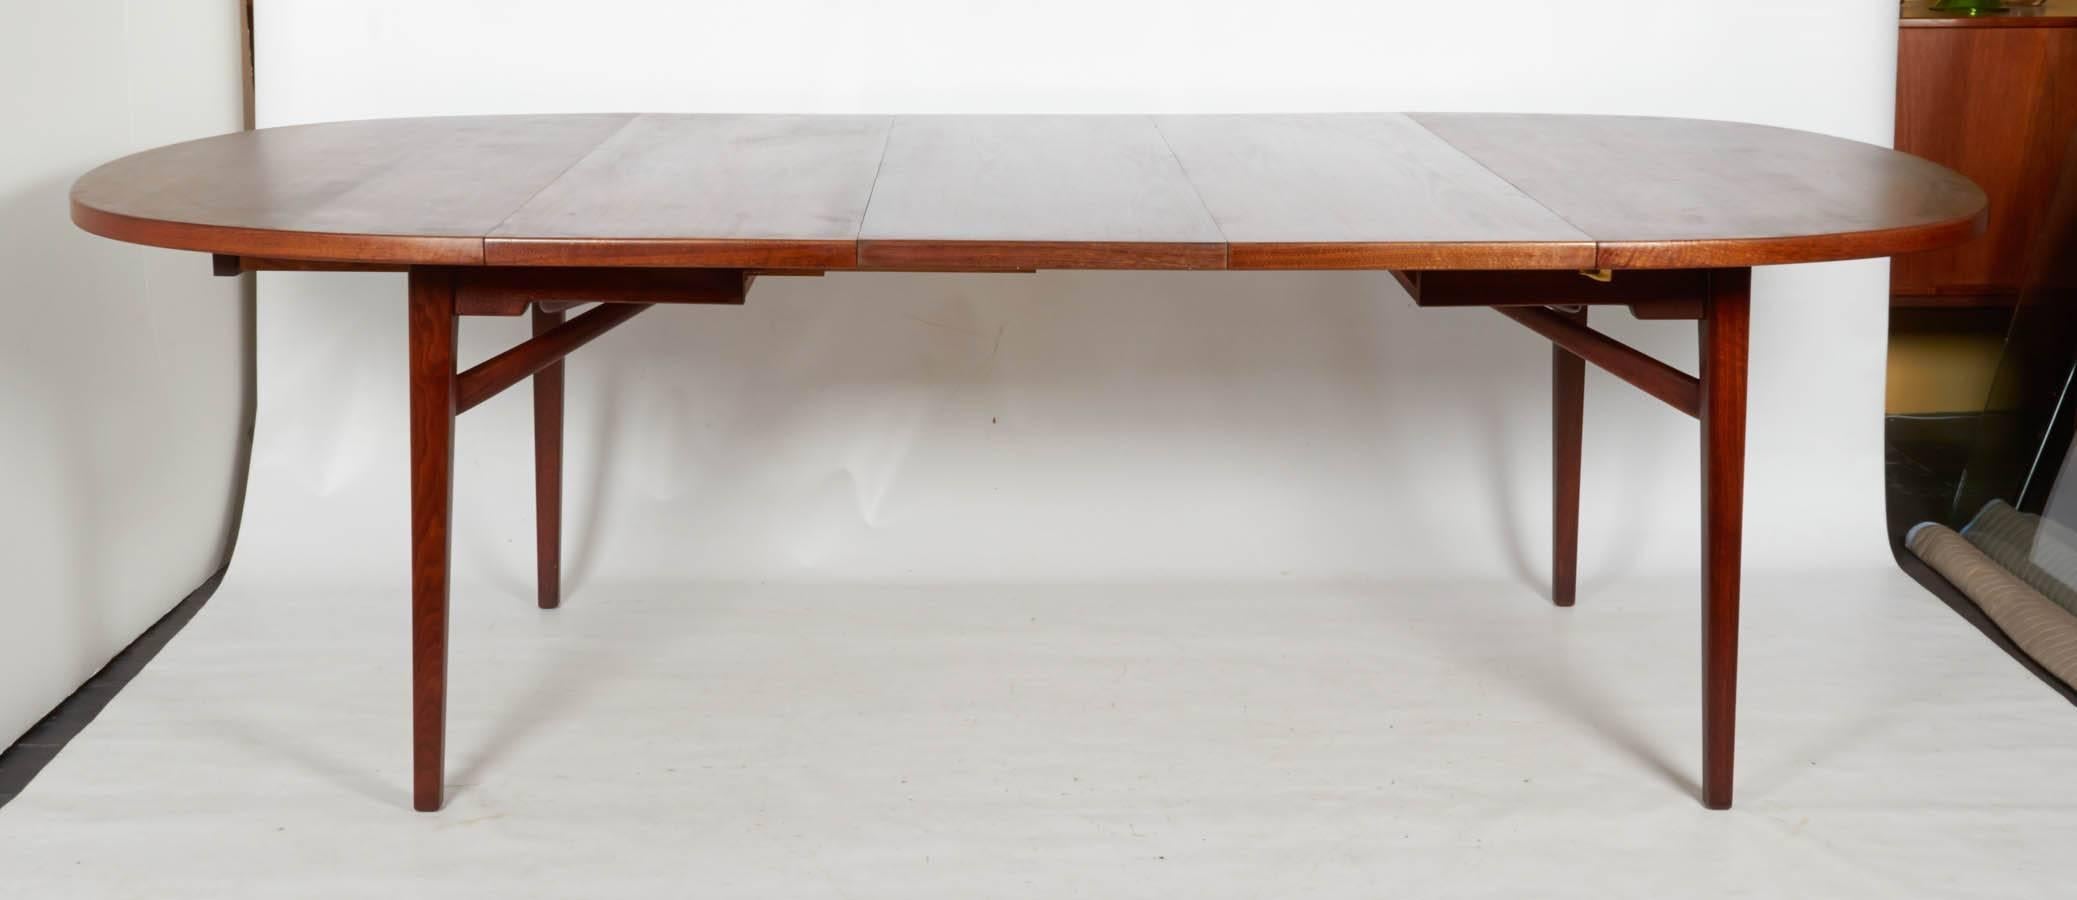 Mid-Century Modern Expandable Dining Table by Jens Risom